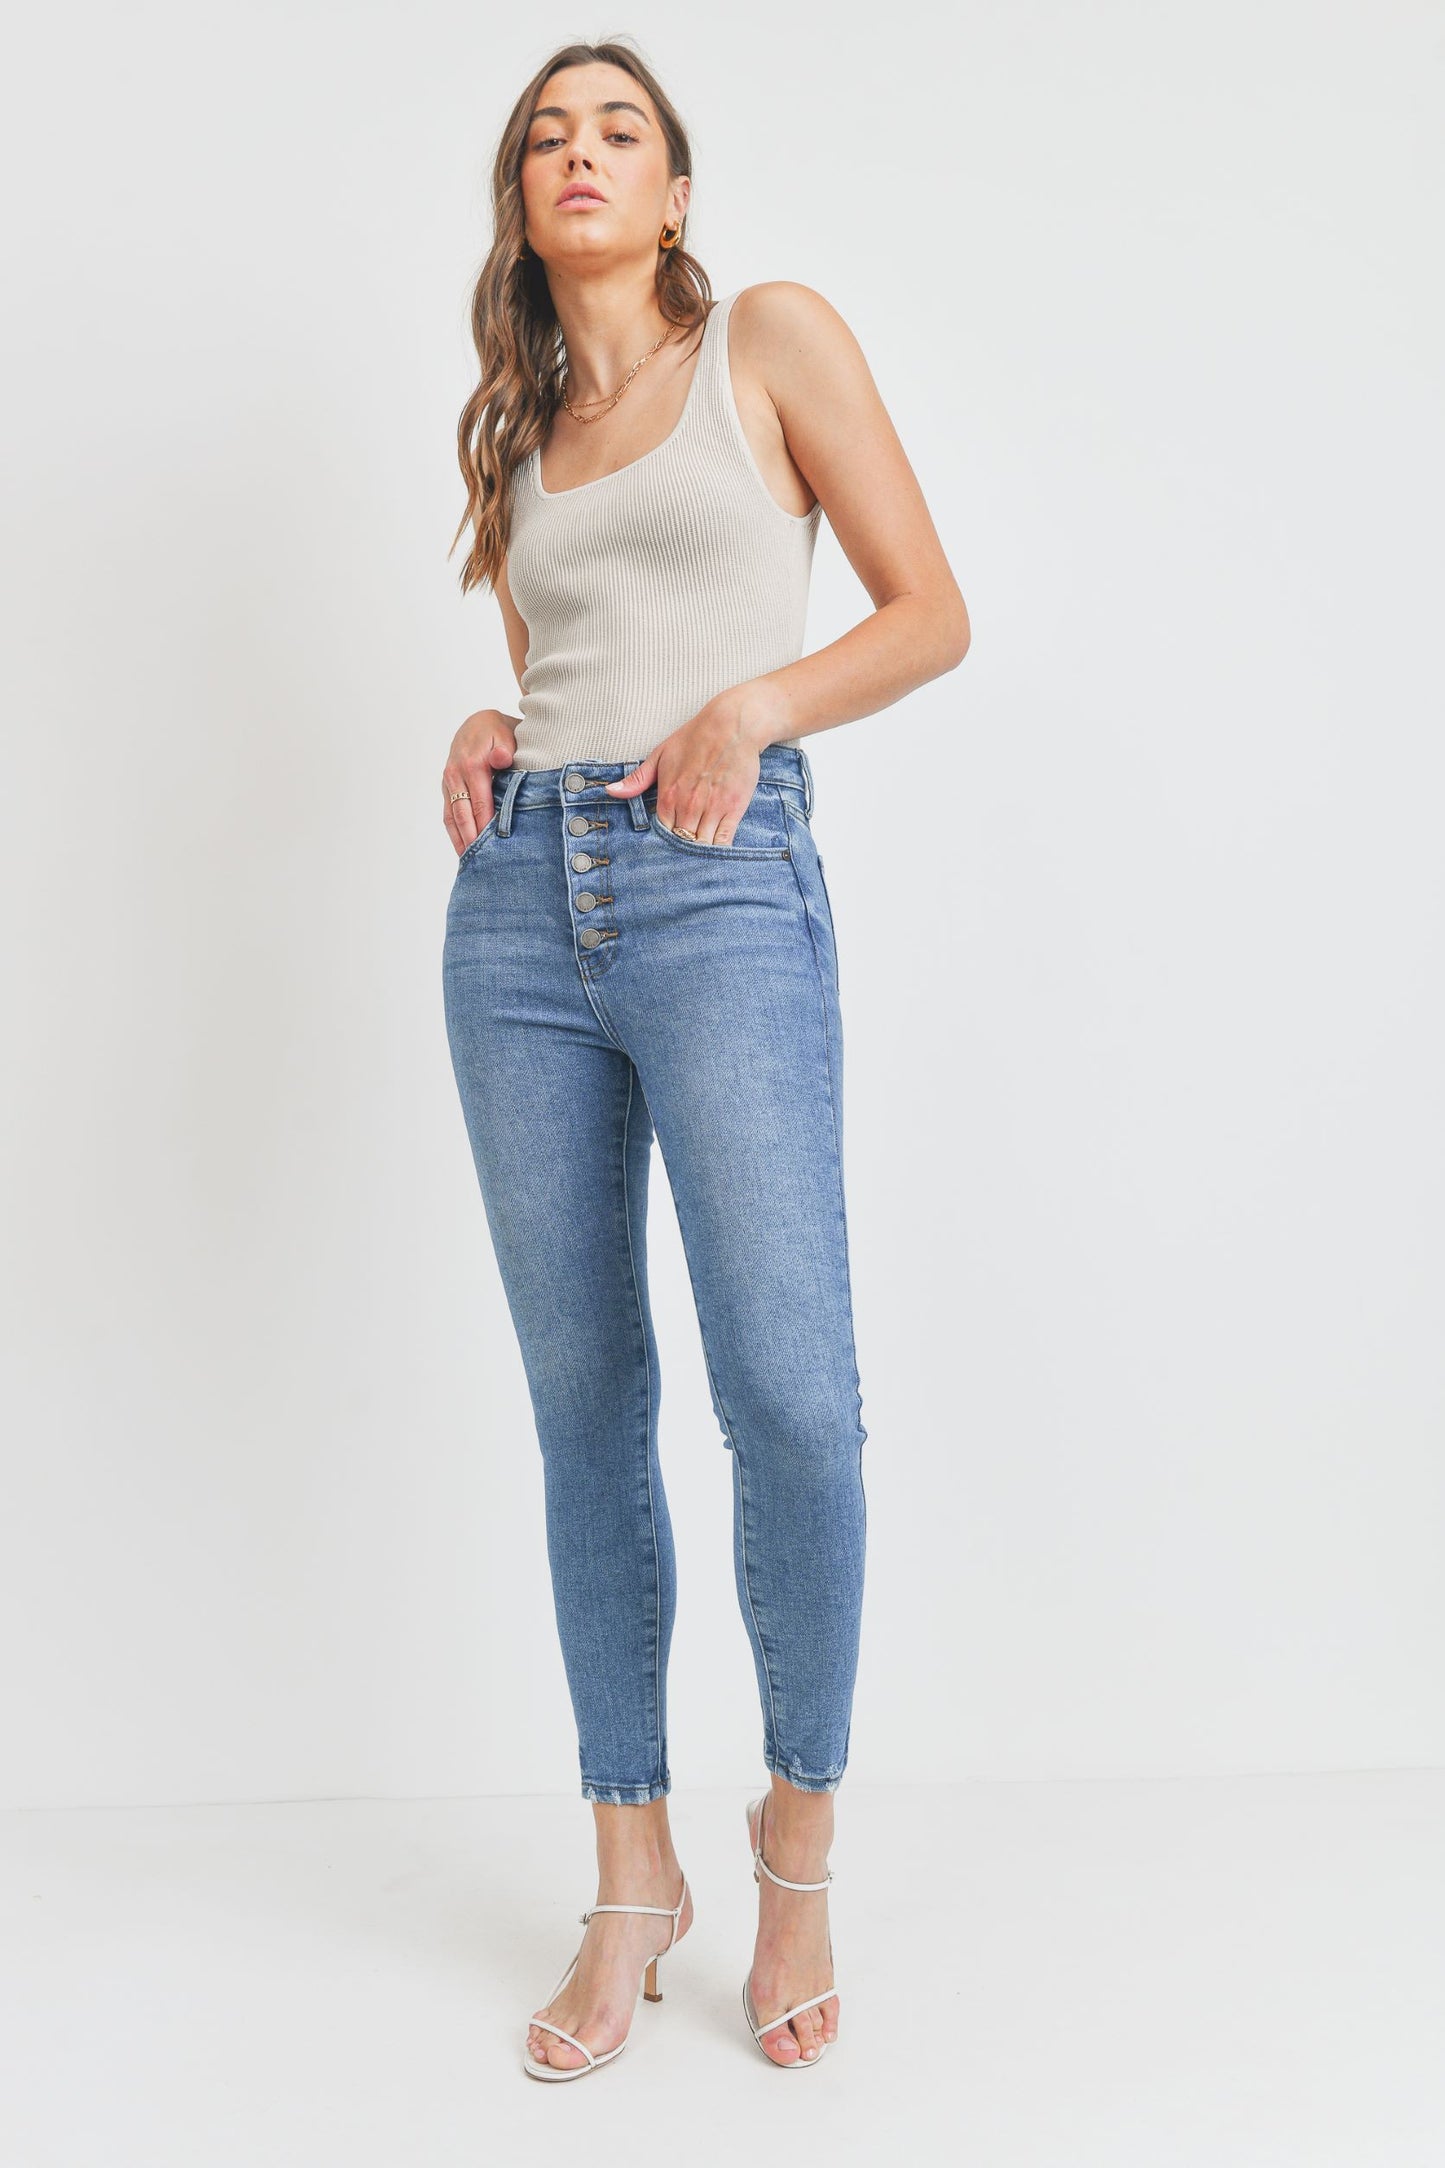 High Rise Button Up Ankle Fray Skinny Jeans - Medium Wash